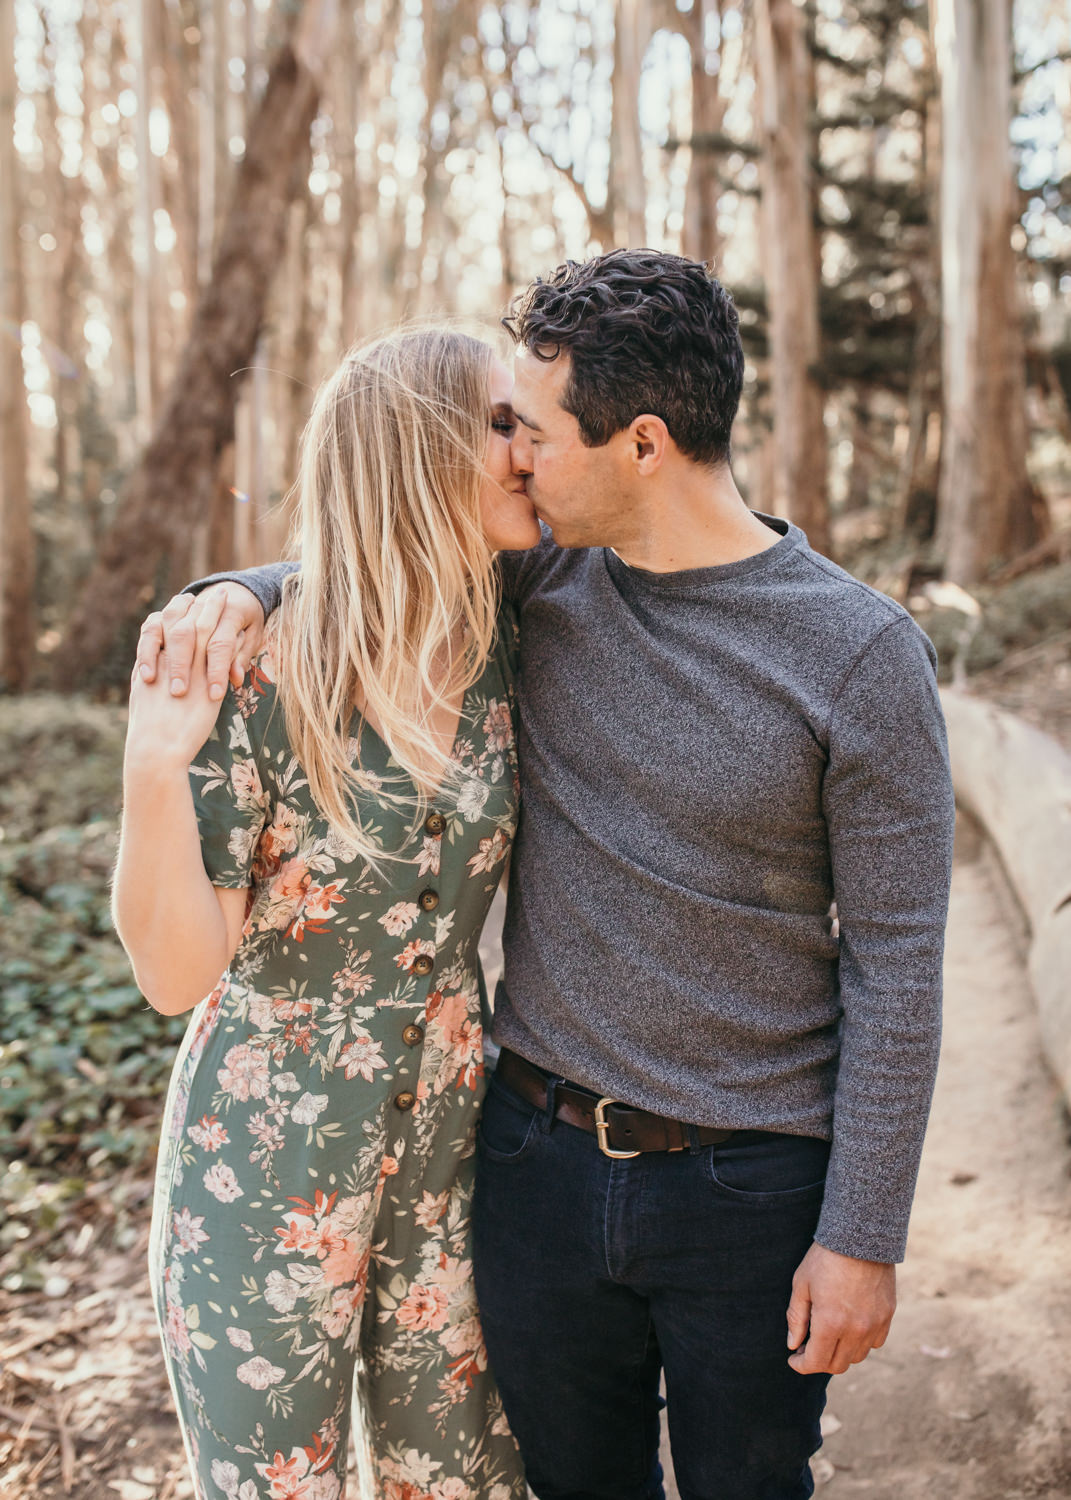 San Francisco Lovers Lane Engagement Session couples posing inspo engagement session outfit Inspo free spirit engagement photos wild and free engagement session bay area bride couples kiss Rachel christopherson Photography